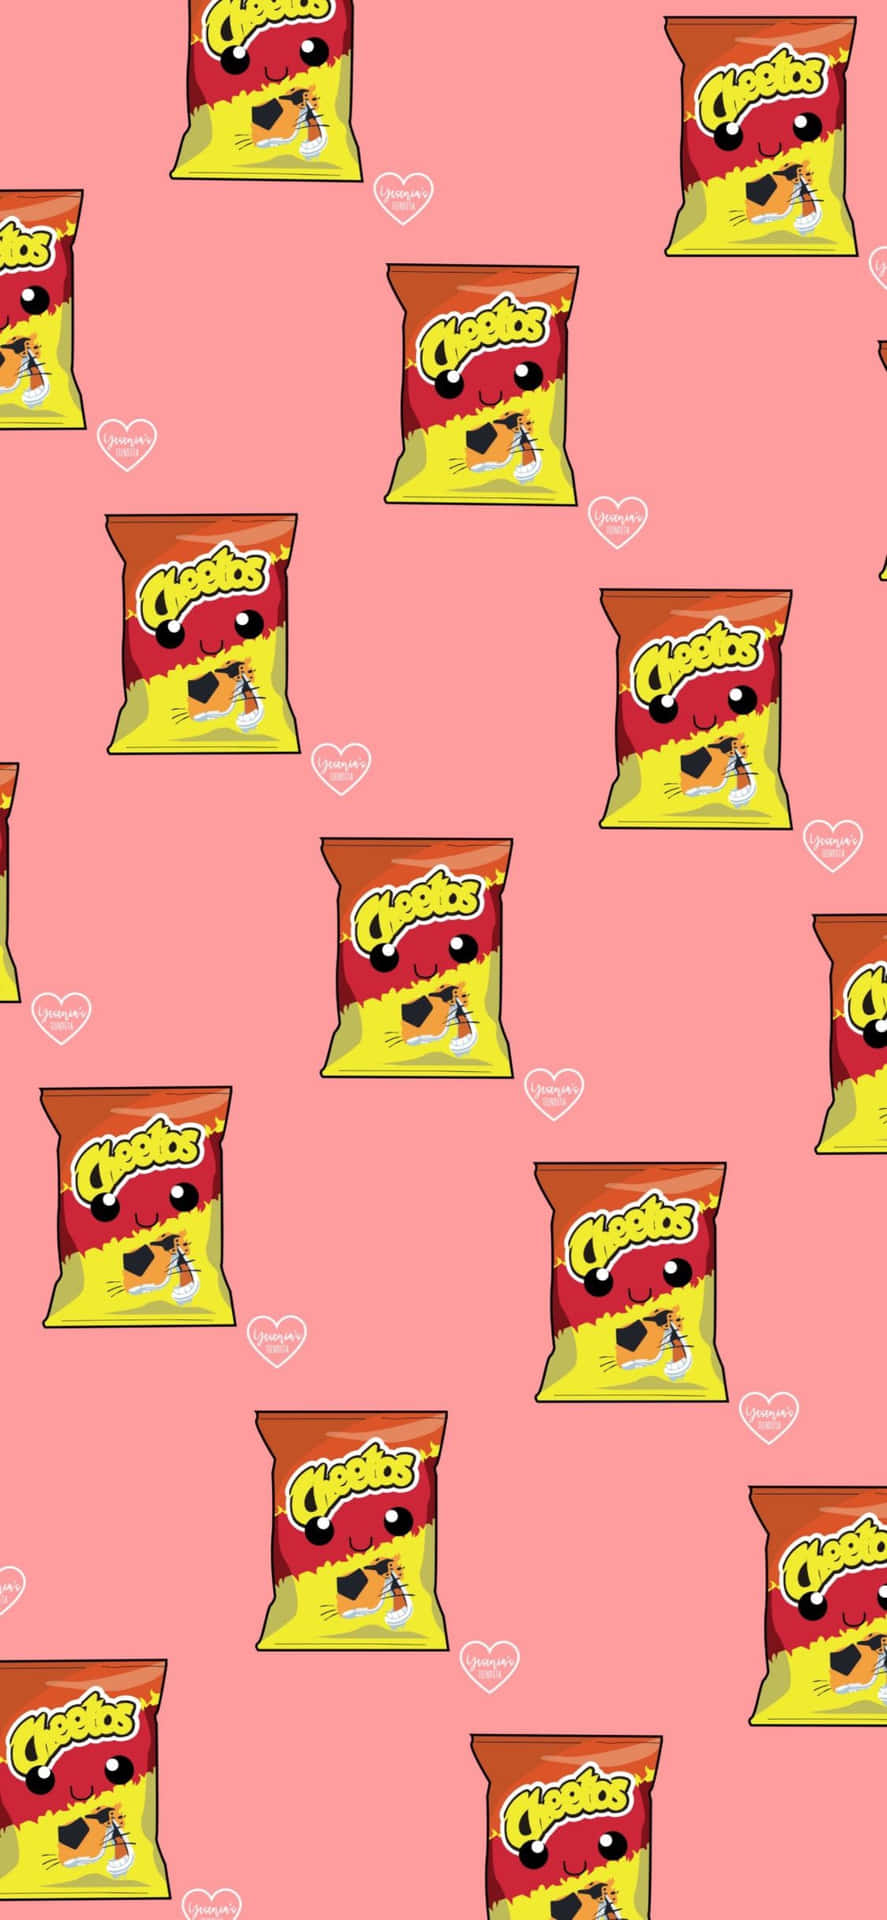 Grab a pack of Hot Cheetos today and indulge in an unforgettable crunchy, spicy and tasty adventure! Wallpaper